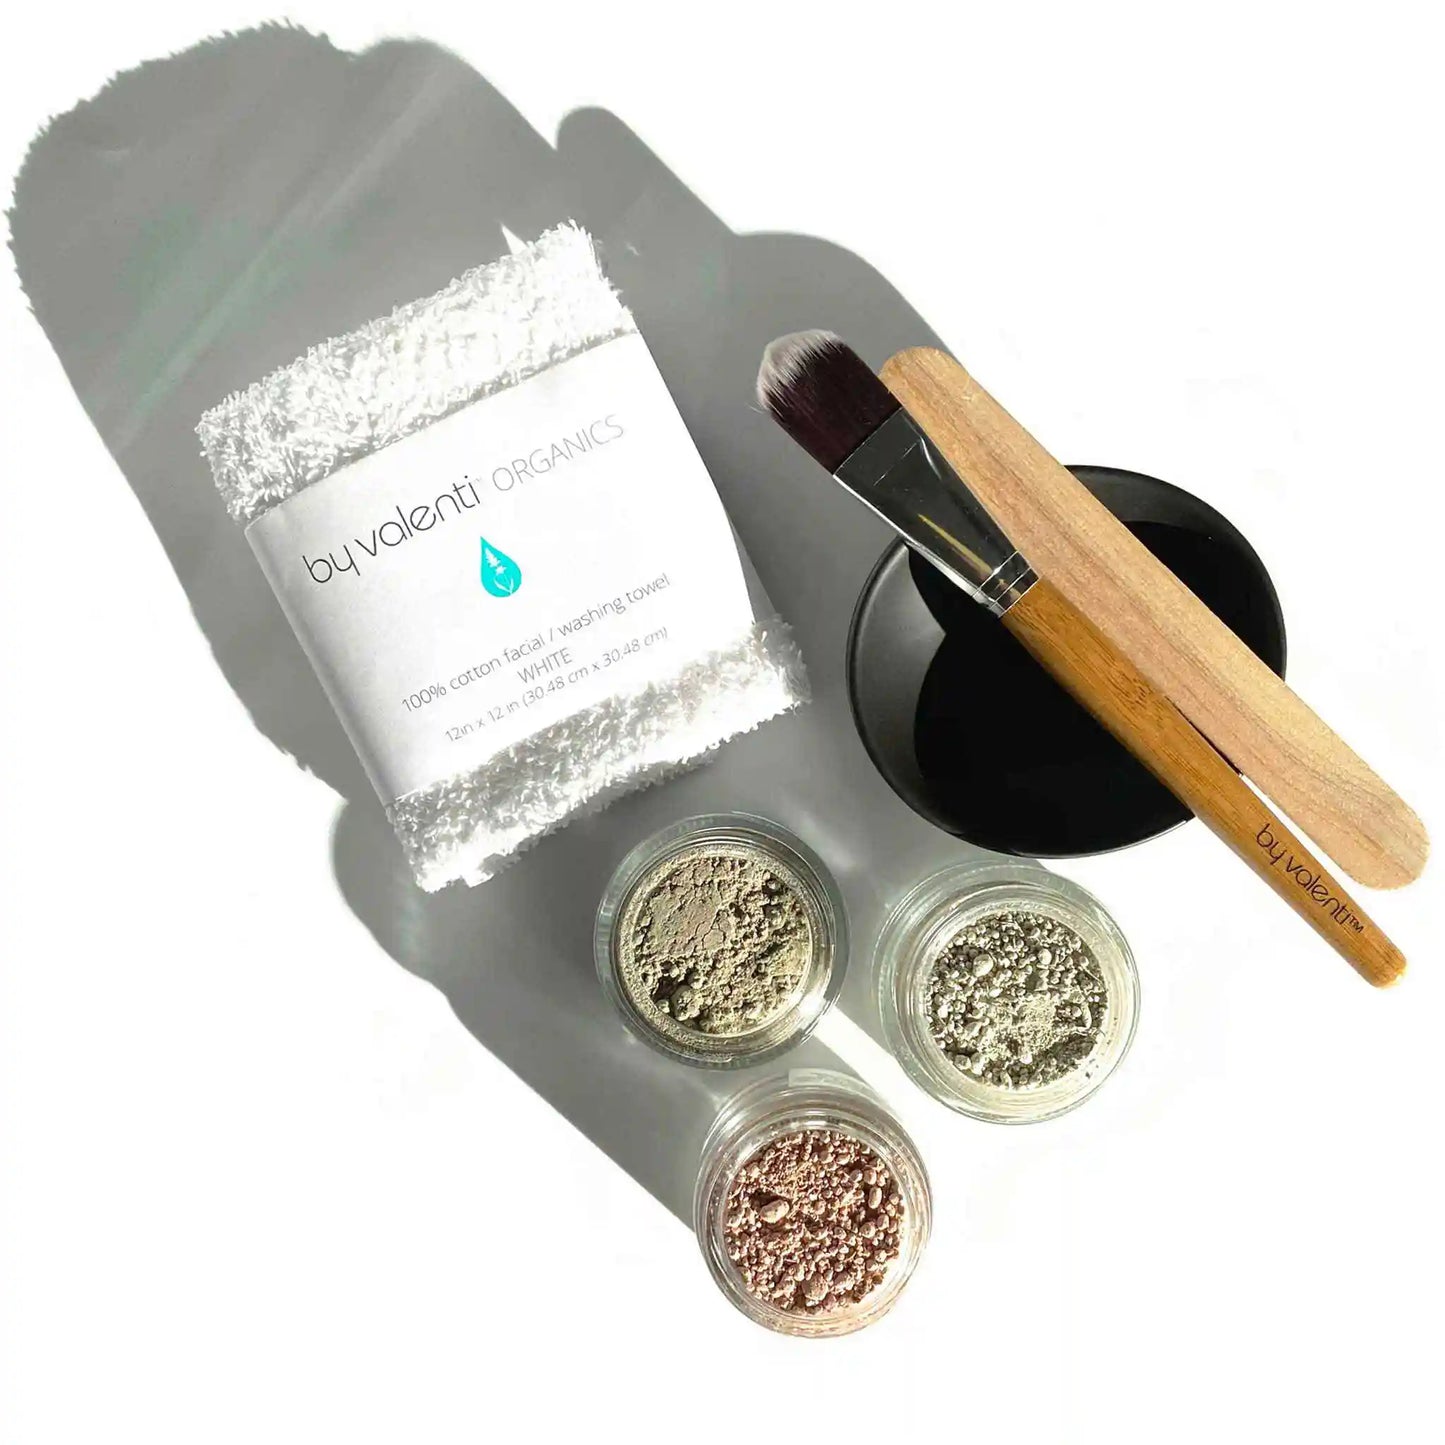 Facial Clay Mask Set with Mixing Bowl By Valenti Organics Clean Skincare